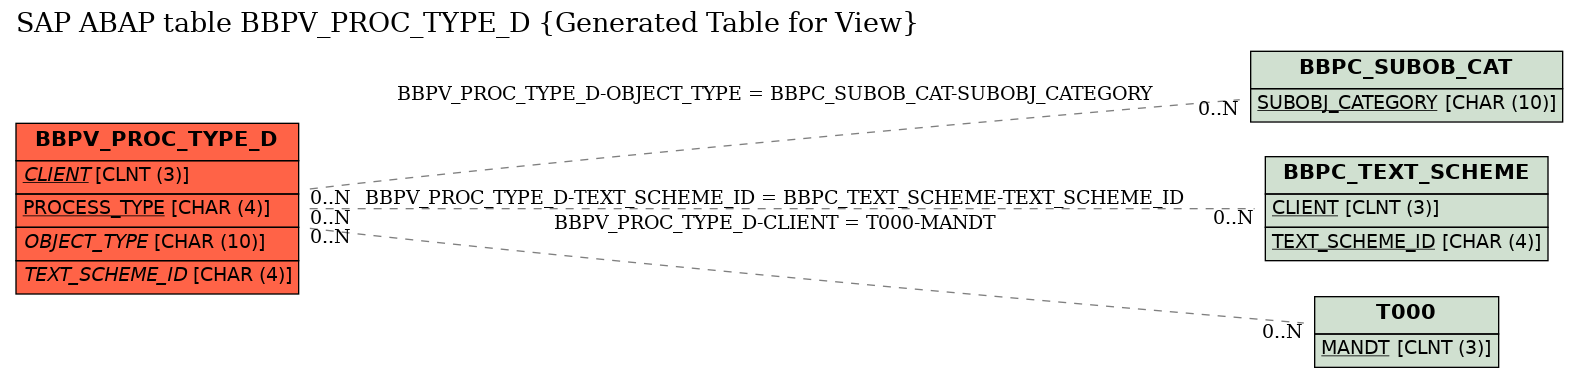 E-R Diagram for table BBPV_PROC_TYPE_D (Generated Table for View)